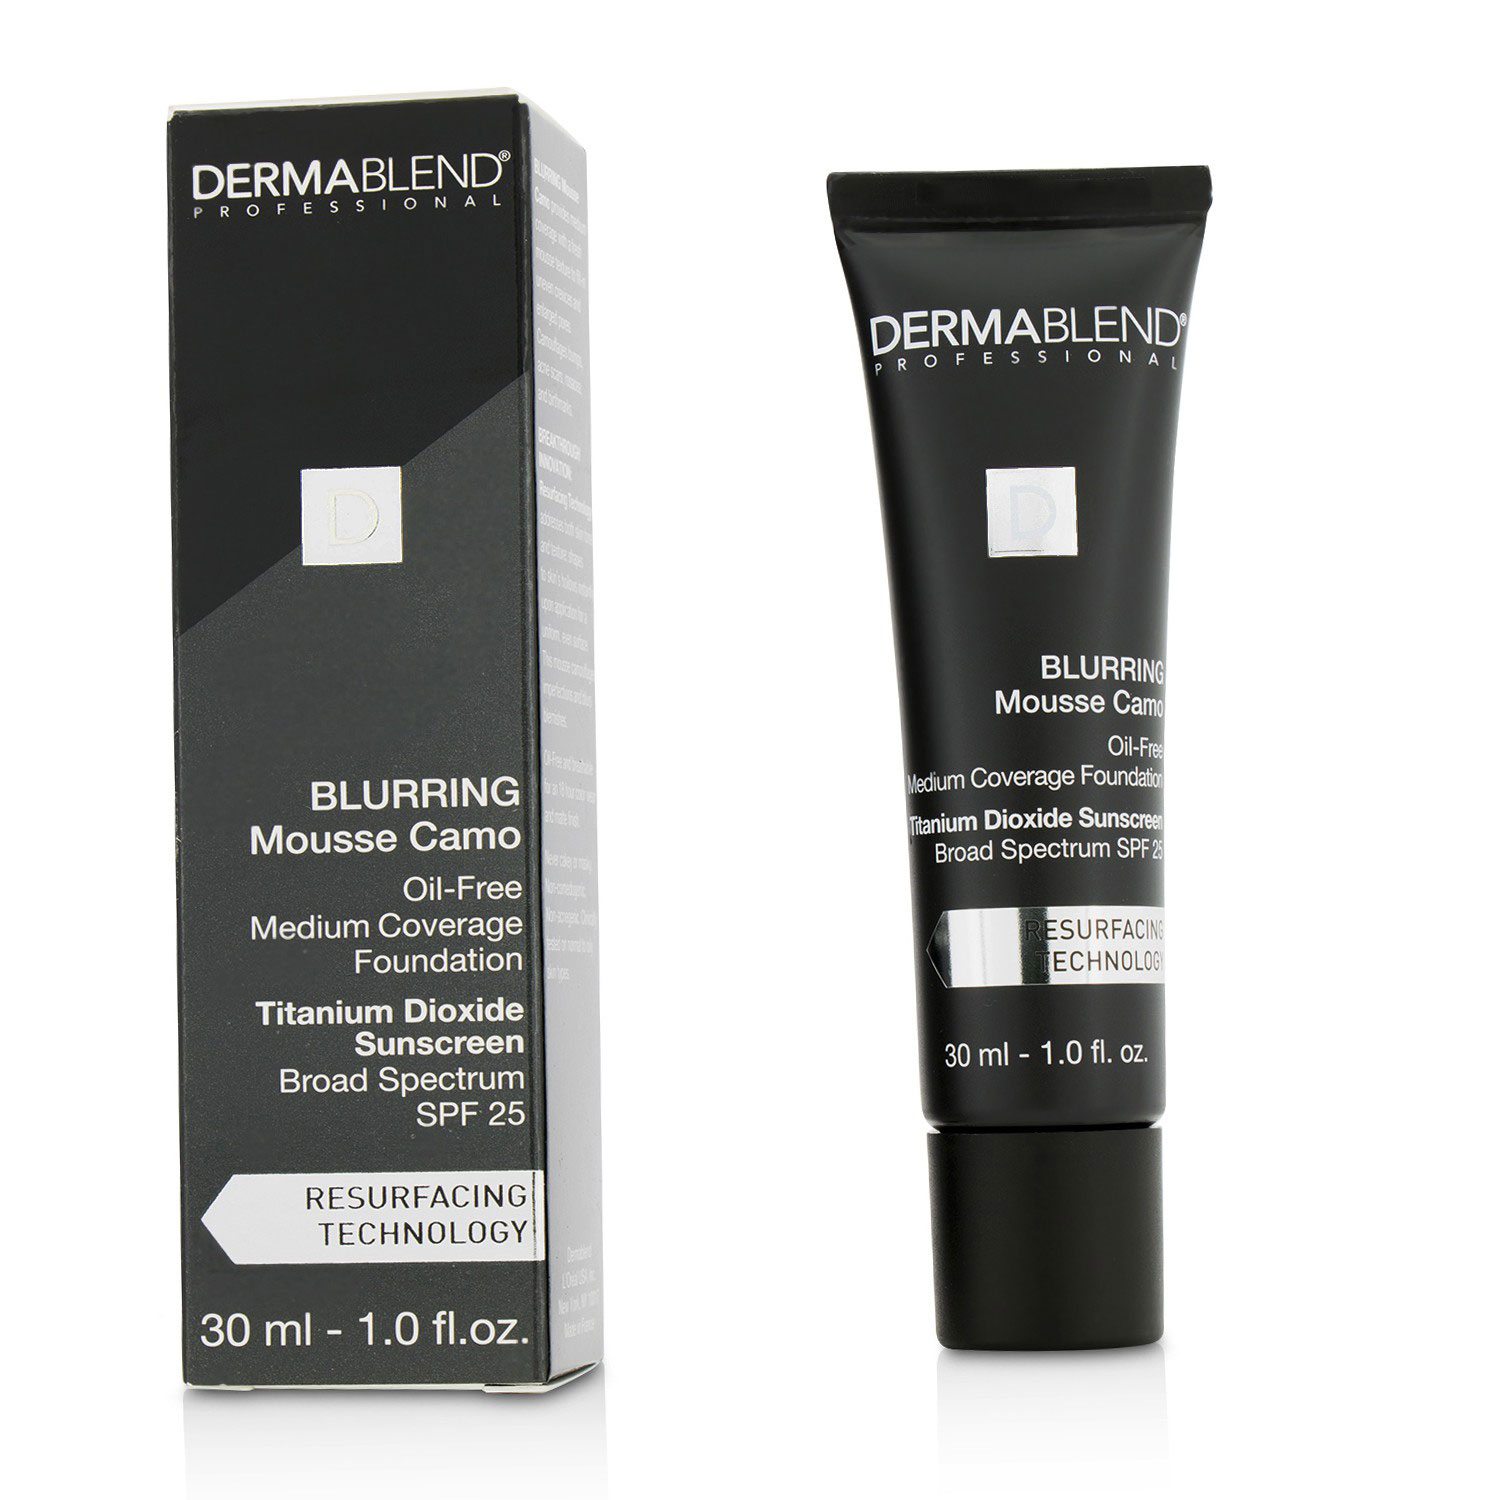 Blurring Mousee Camo Oil Free Foundation SPF 25 (Medium Coverage) - #45C Clay Dermablend Image